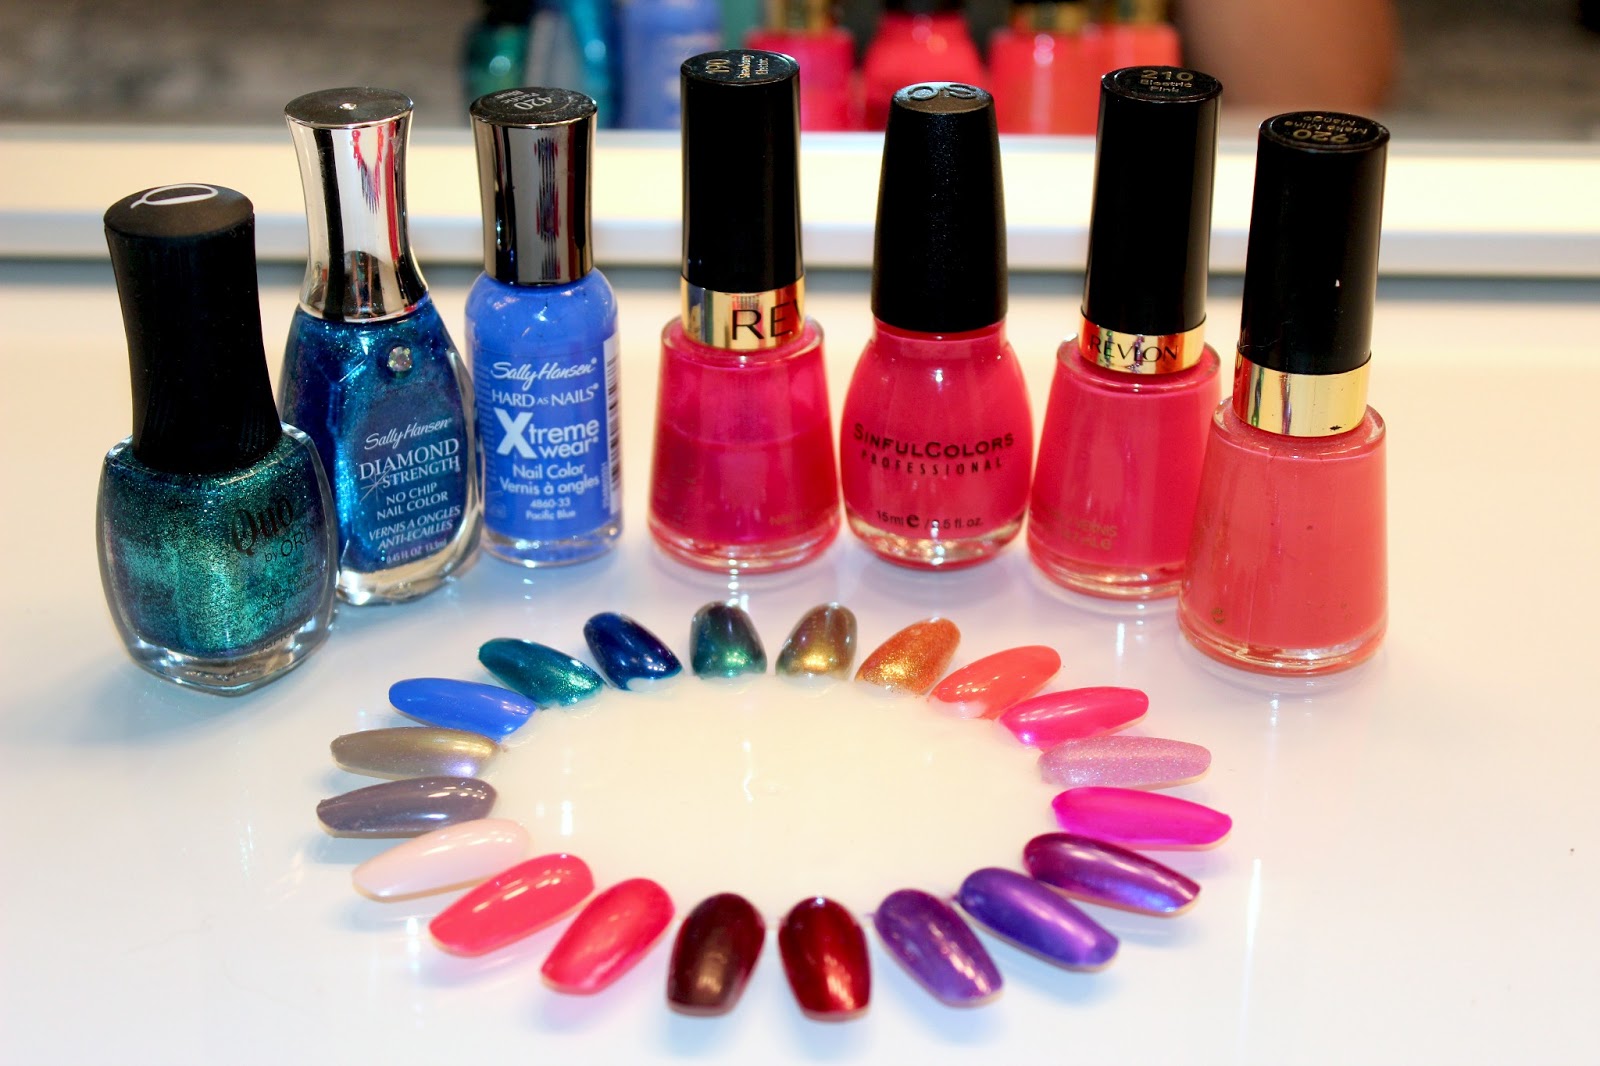 9. "Winterize Your Nails with These Must-Have Nail Polish Shades" - wide 8